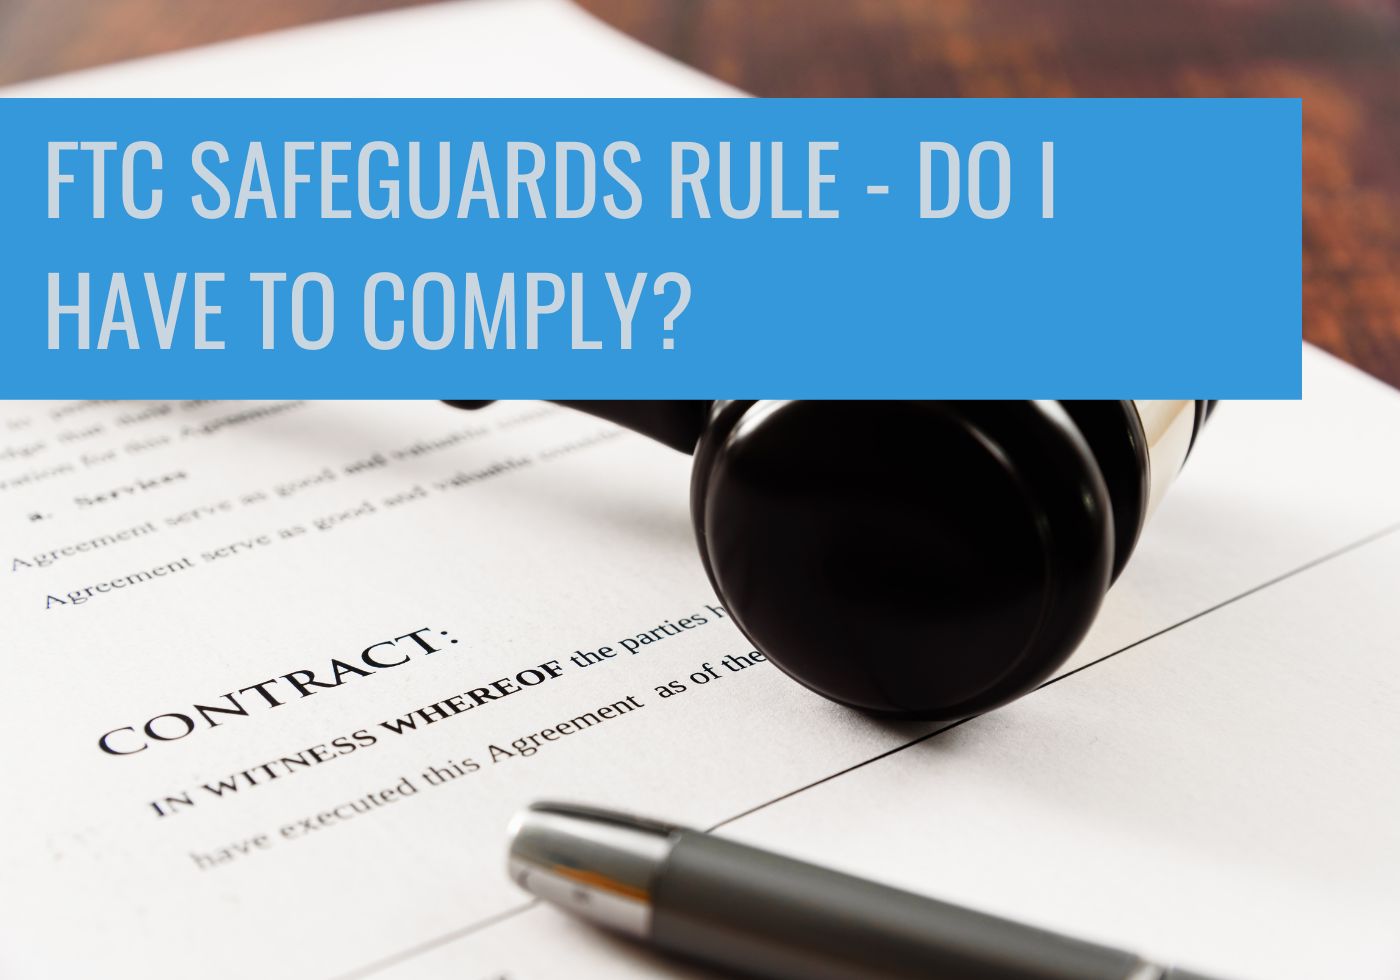 FTC Safeguards Rule Do I have to comply?